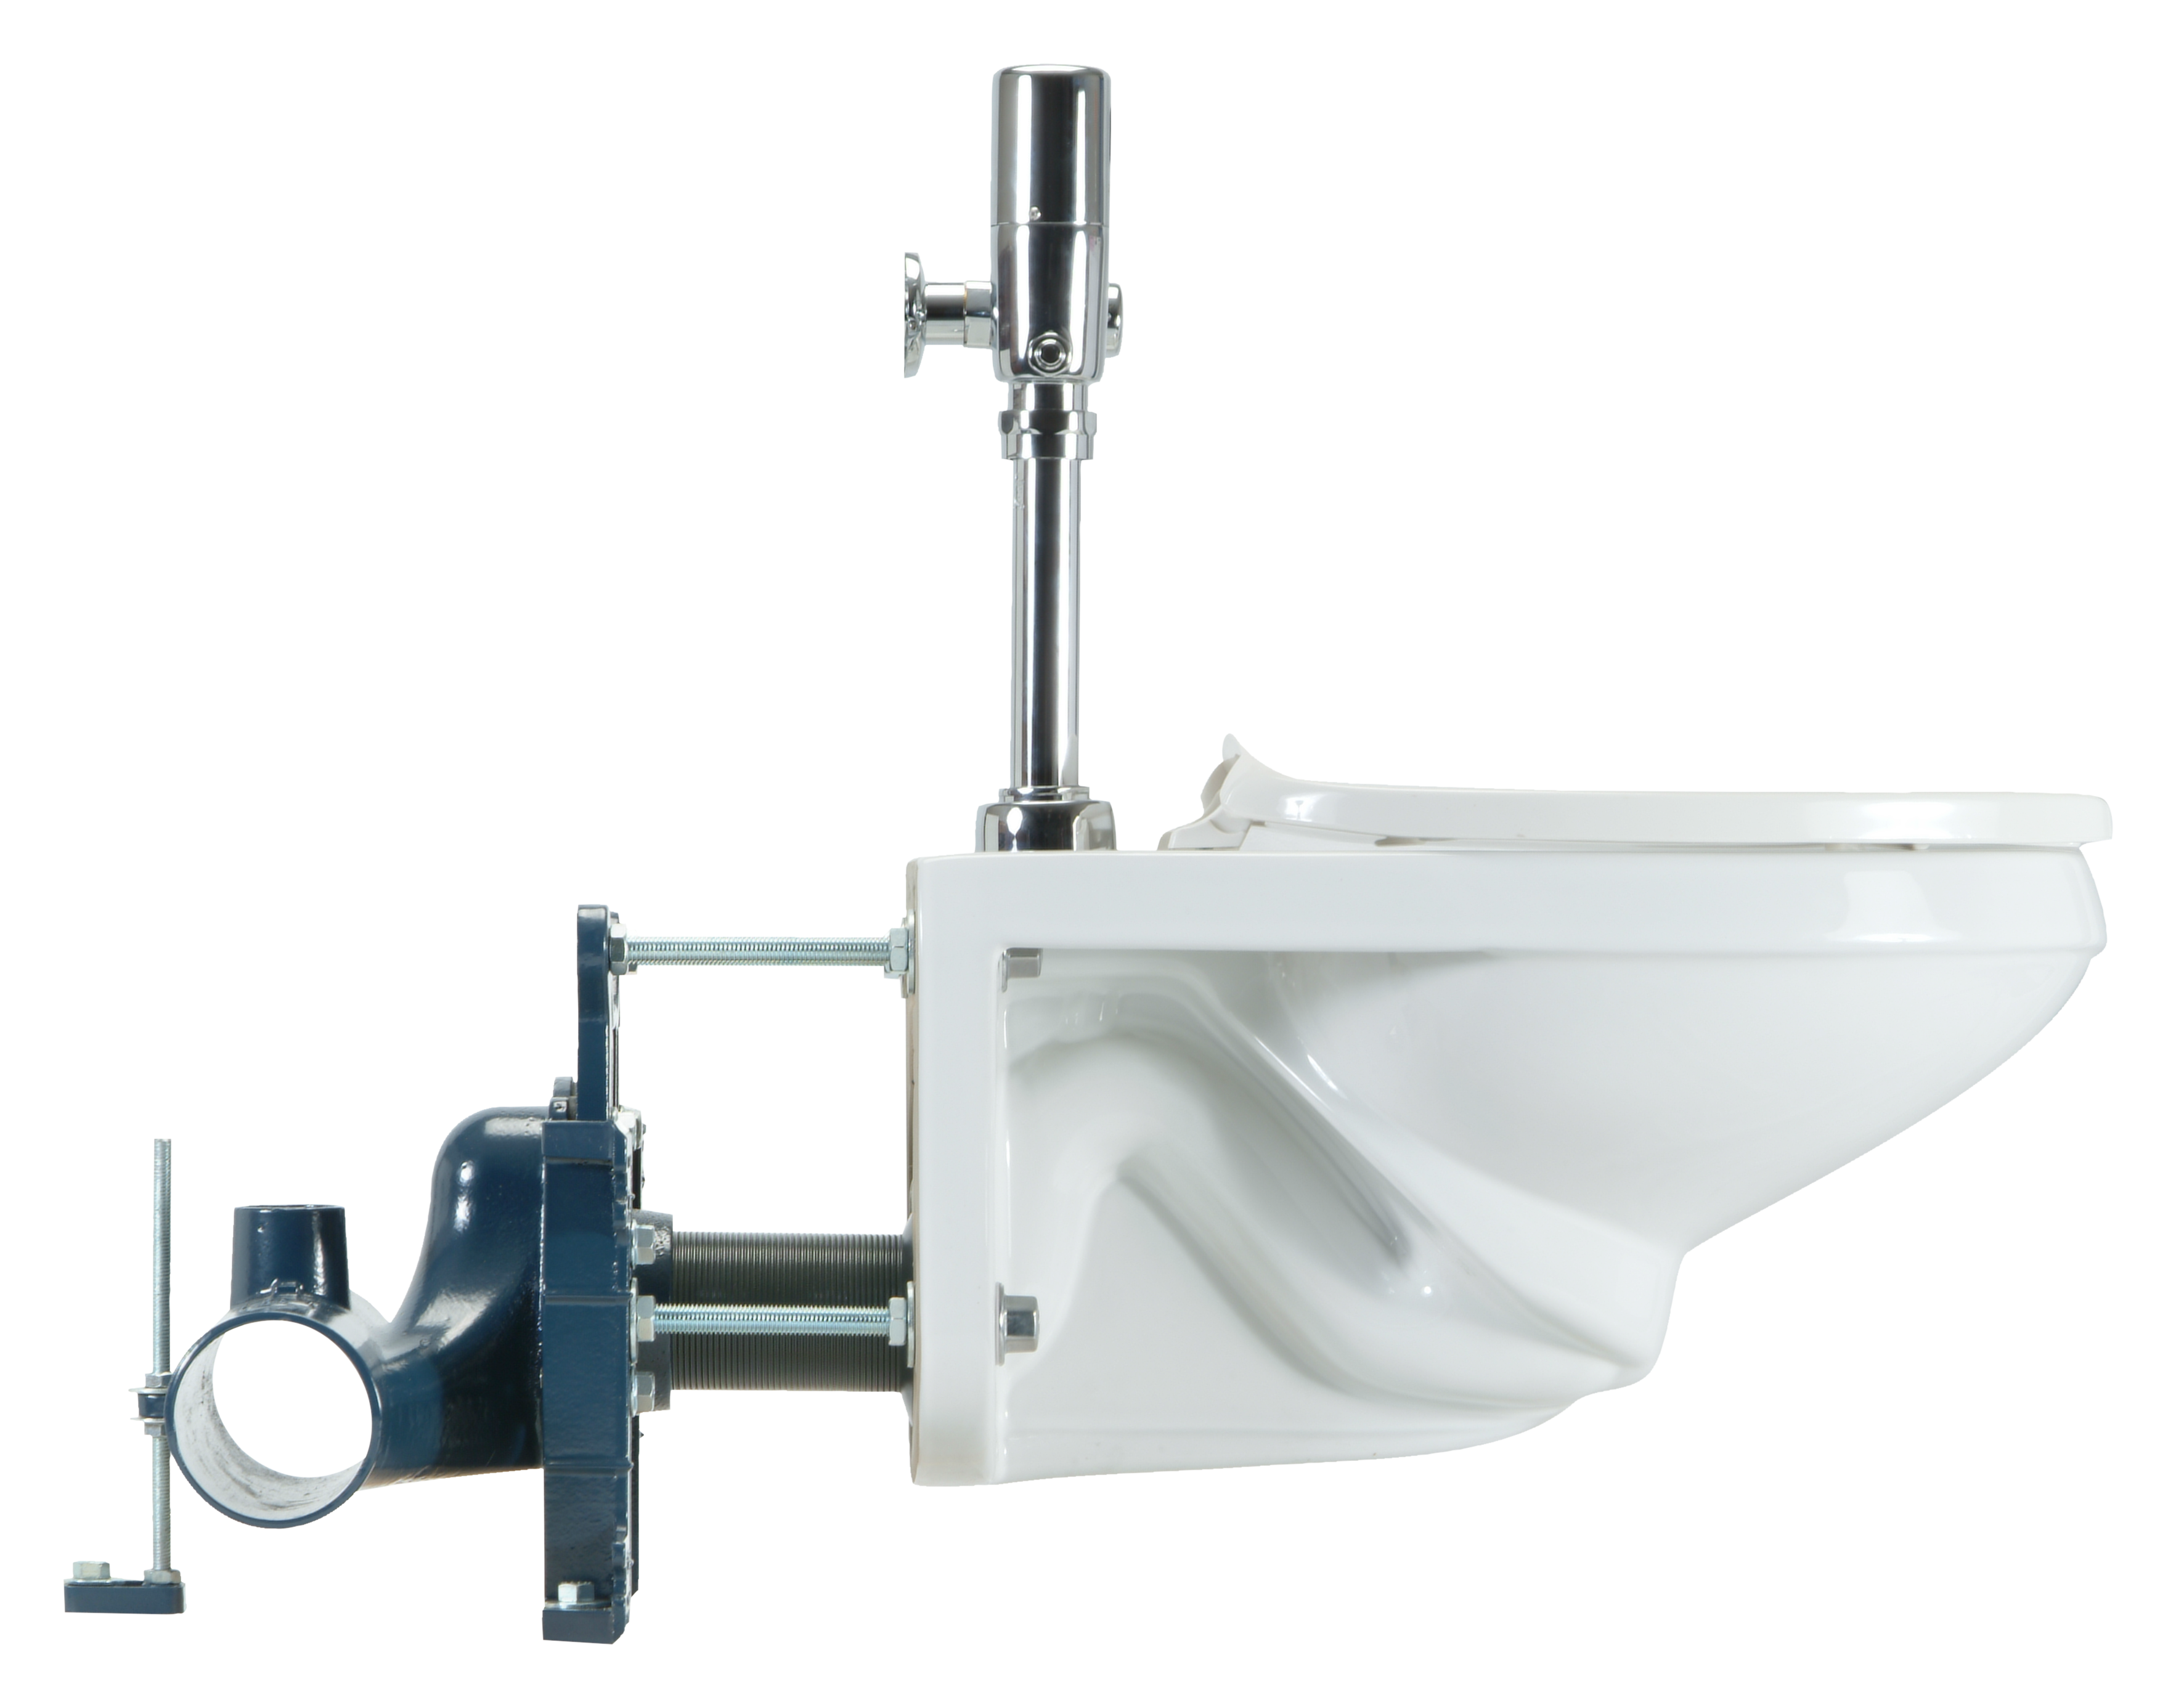 Zurn High Efficiency Toilet and Carrier (HETC) System Honored as a 2015 MoneySaving Product by